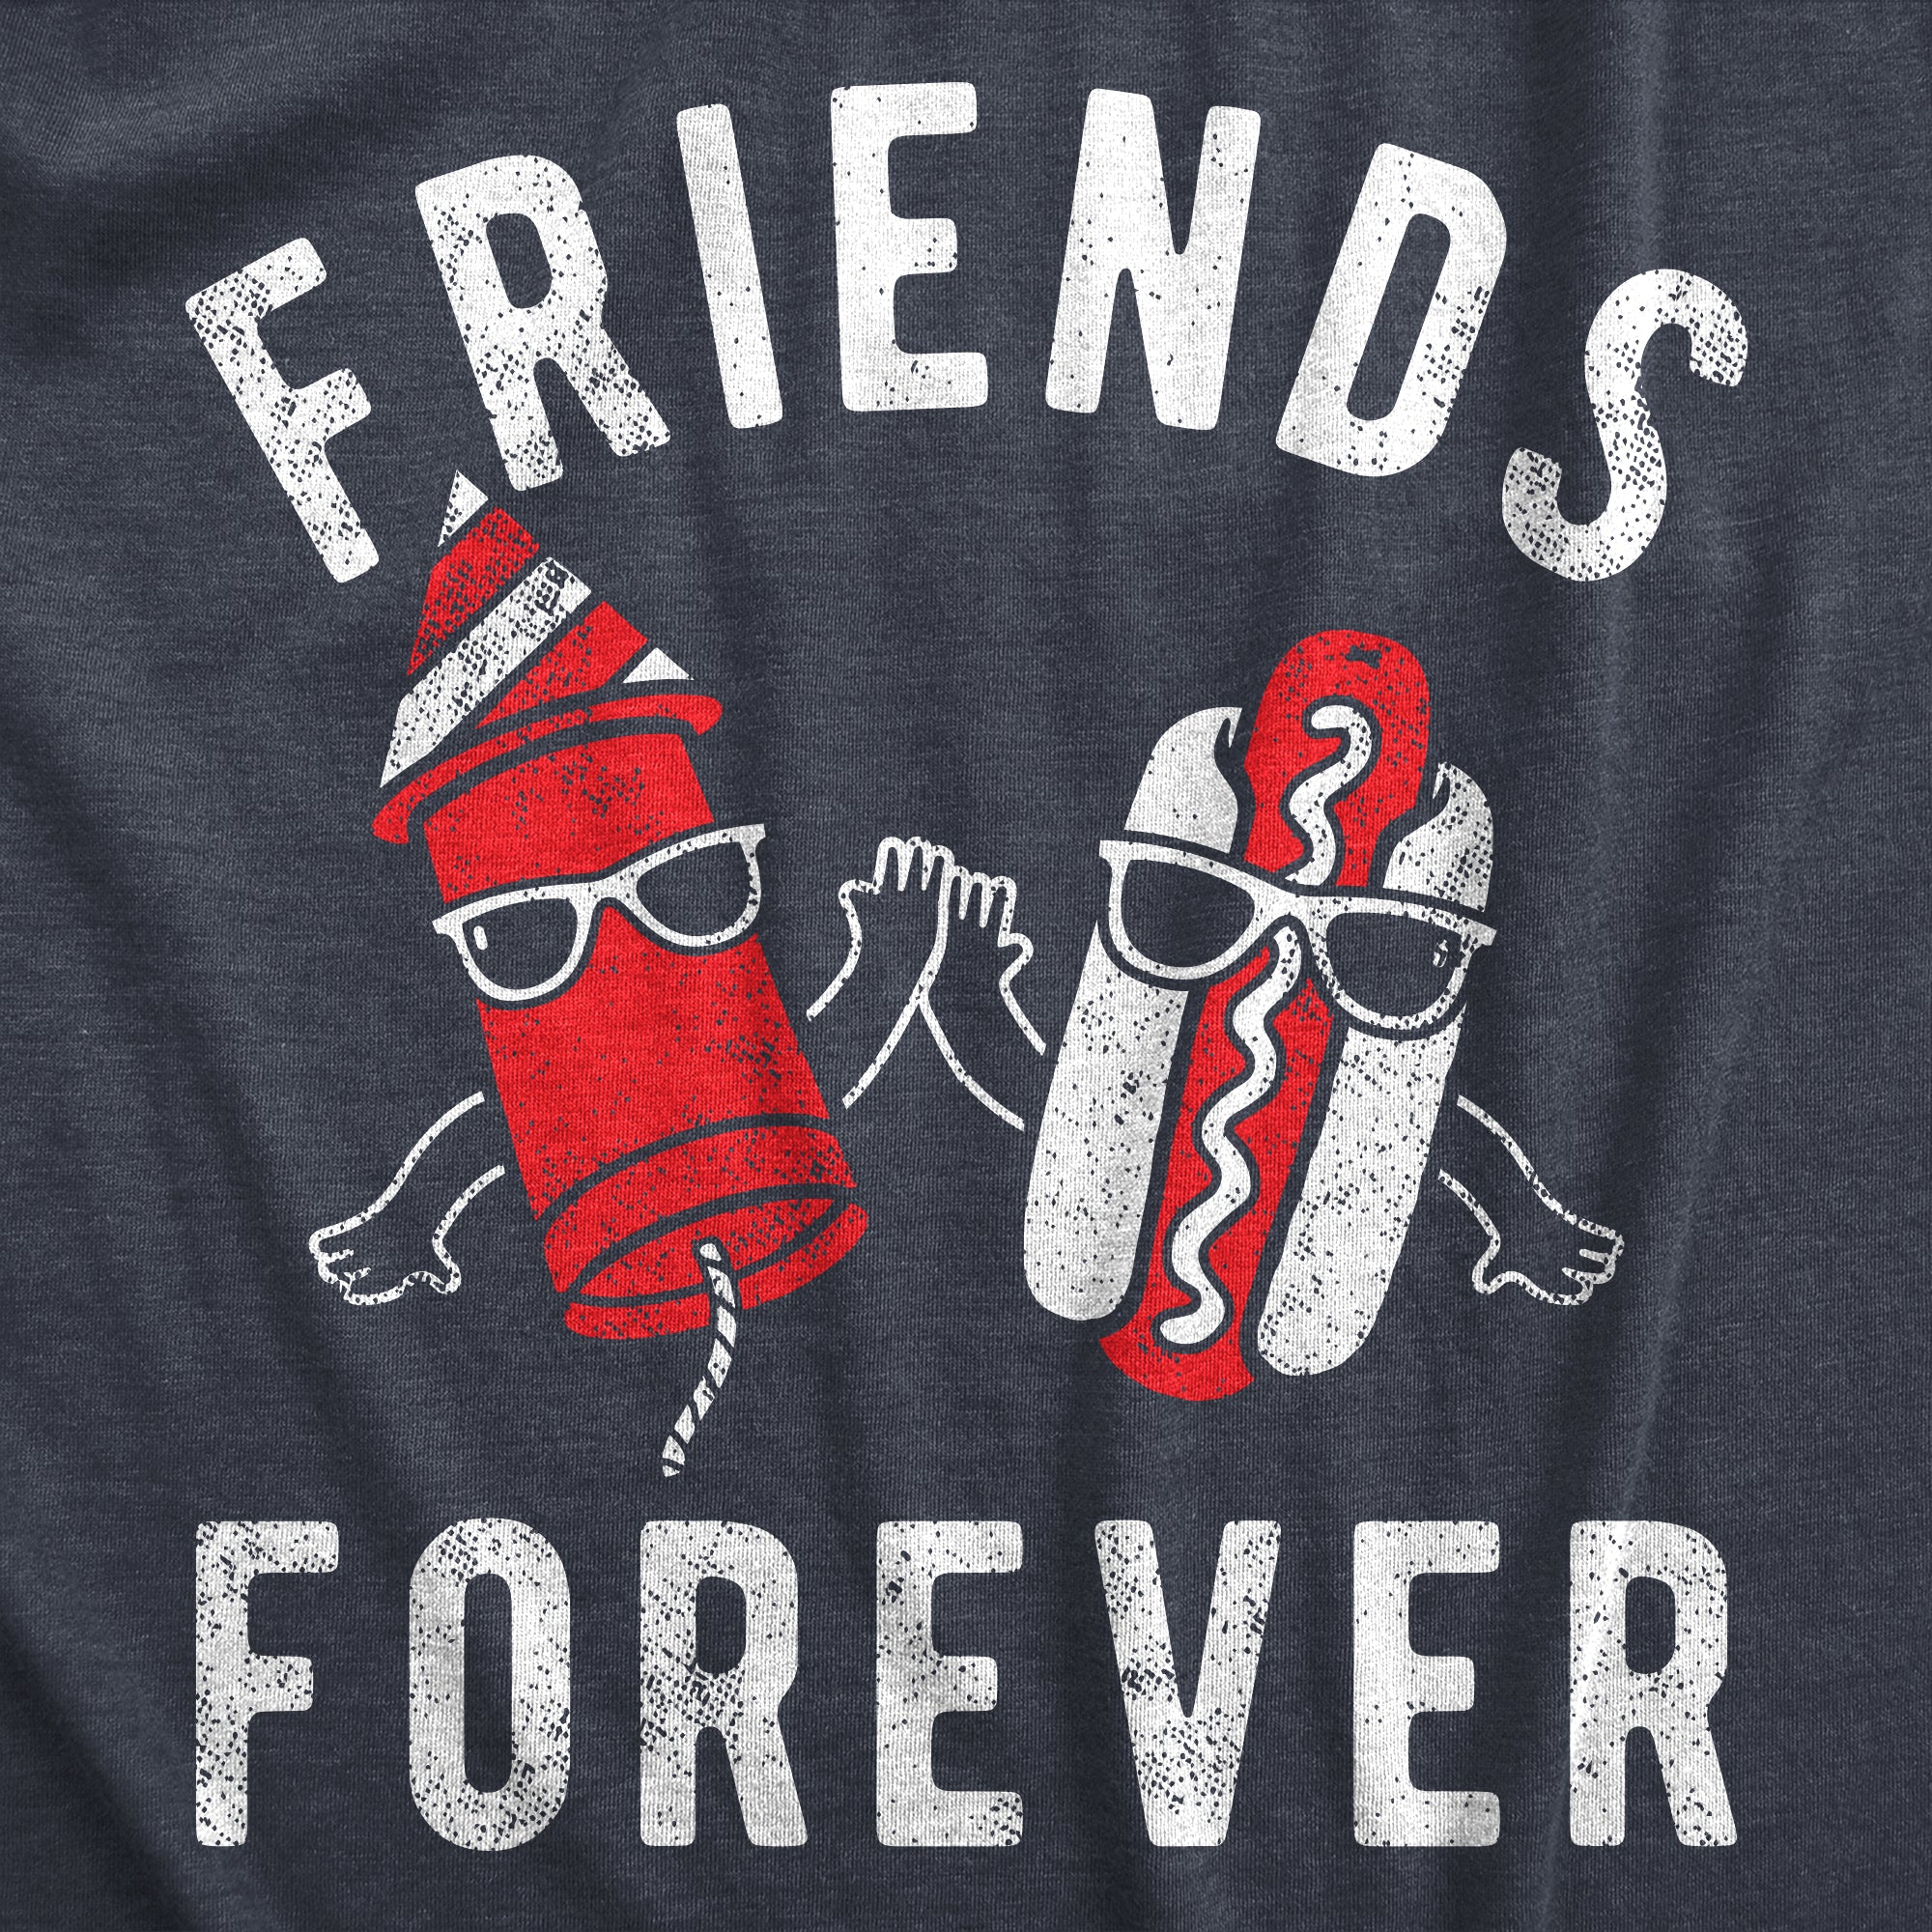 Funny Heather Navy - FRIENDS Friends Forever Firecracker Hot Dog Womens T Shirt Nerdy Fourth Of July Sarcastic Tee